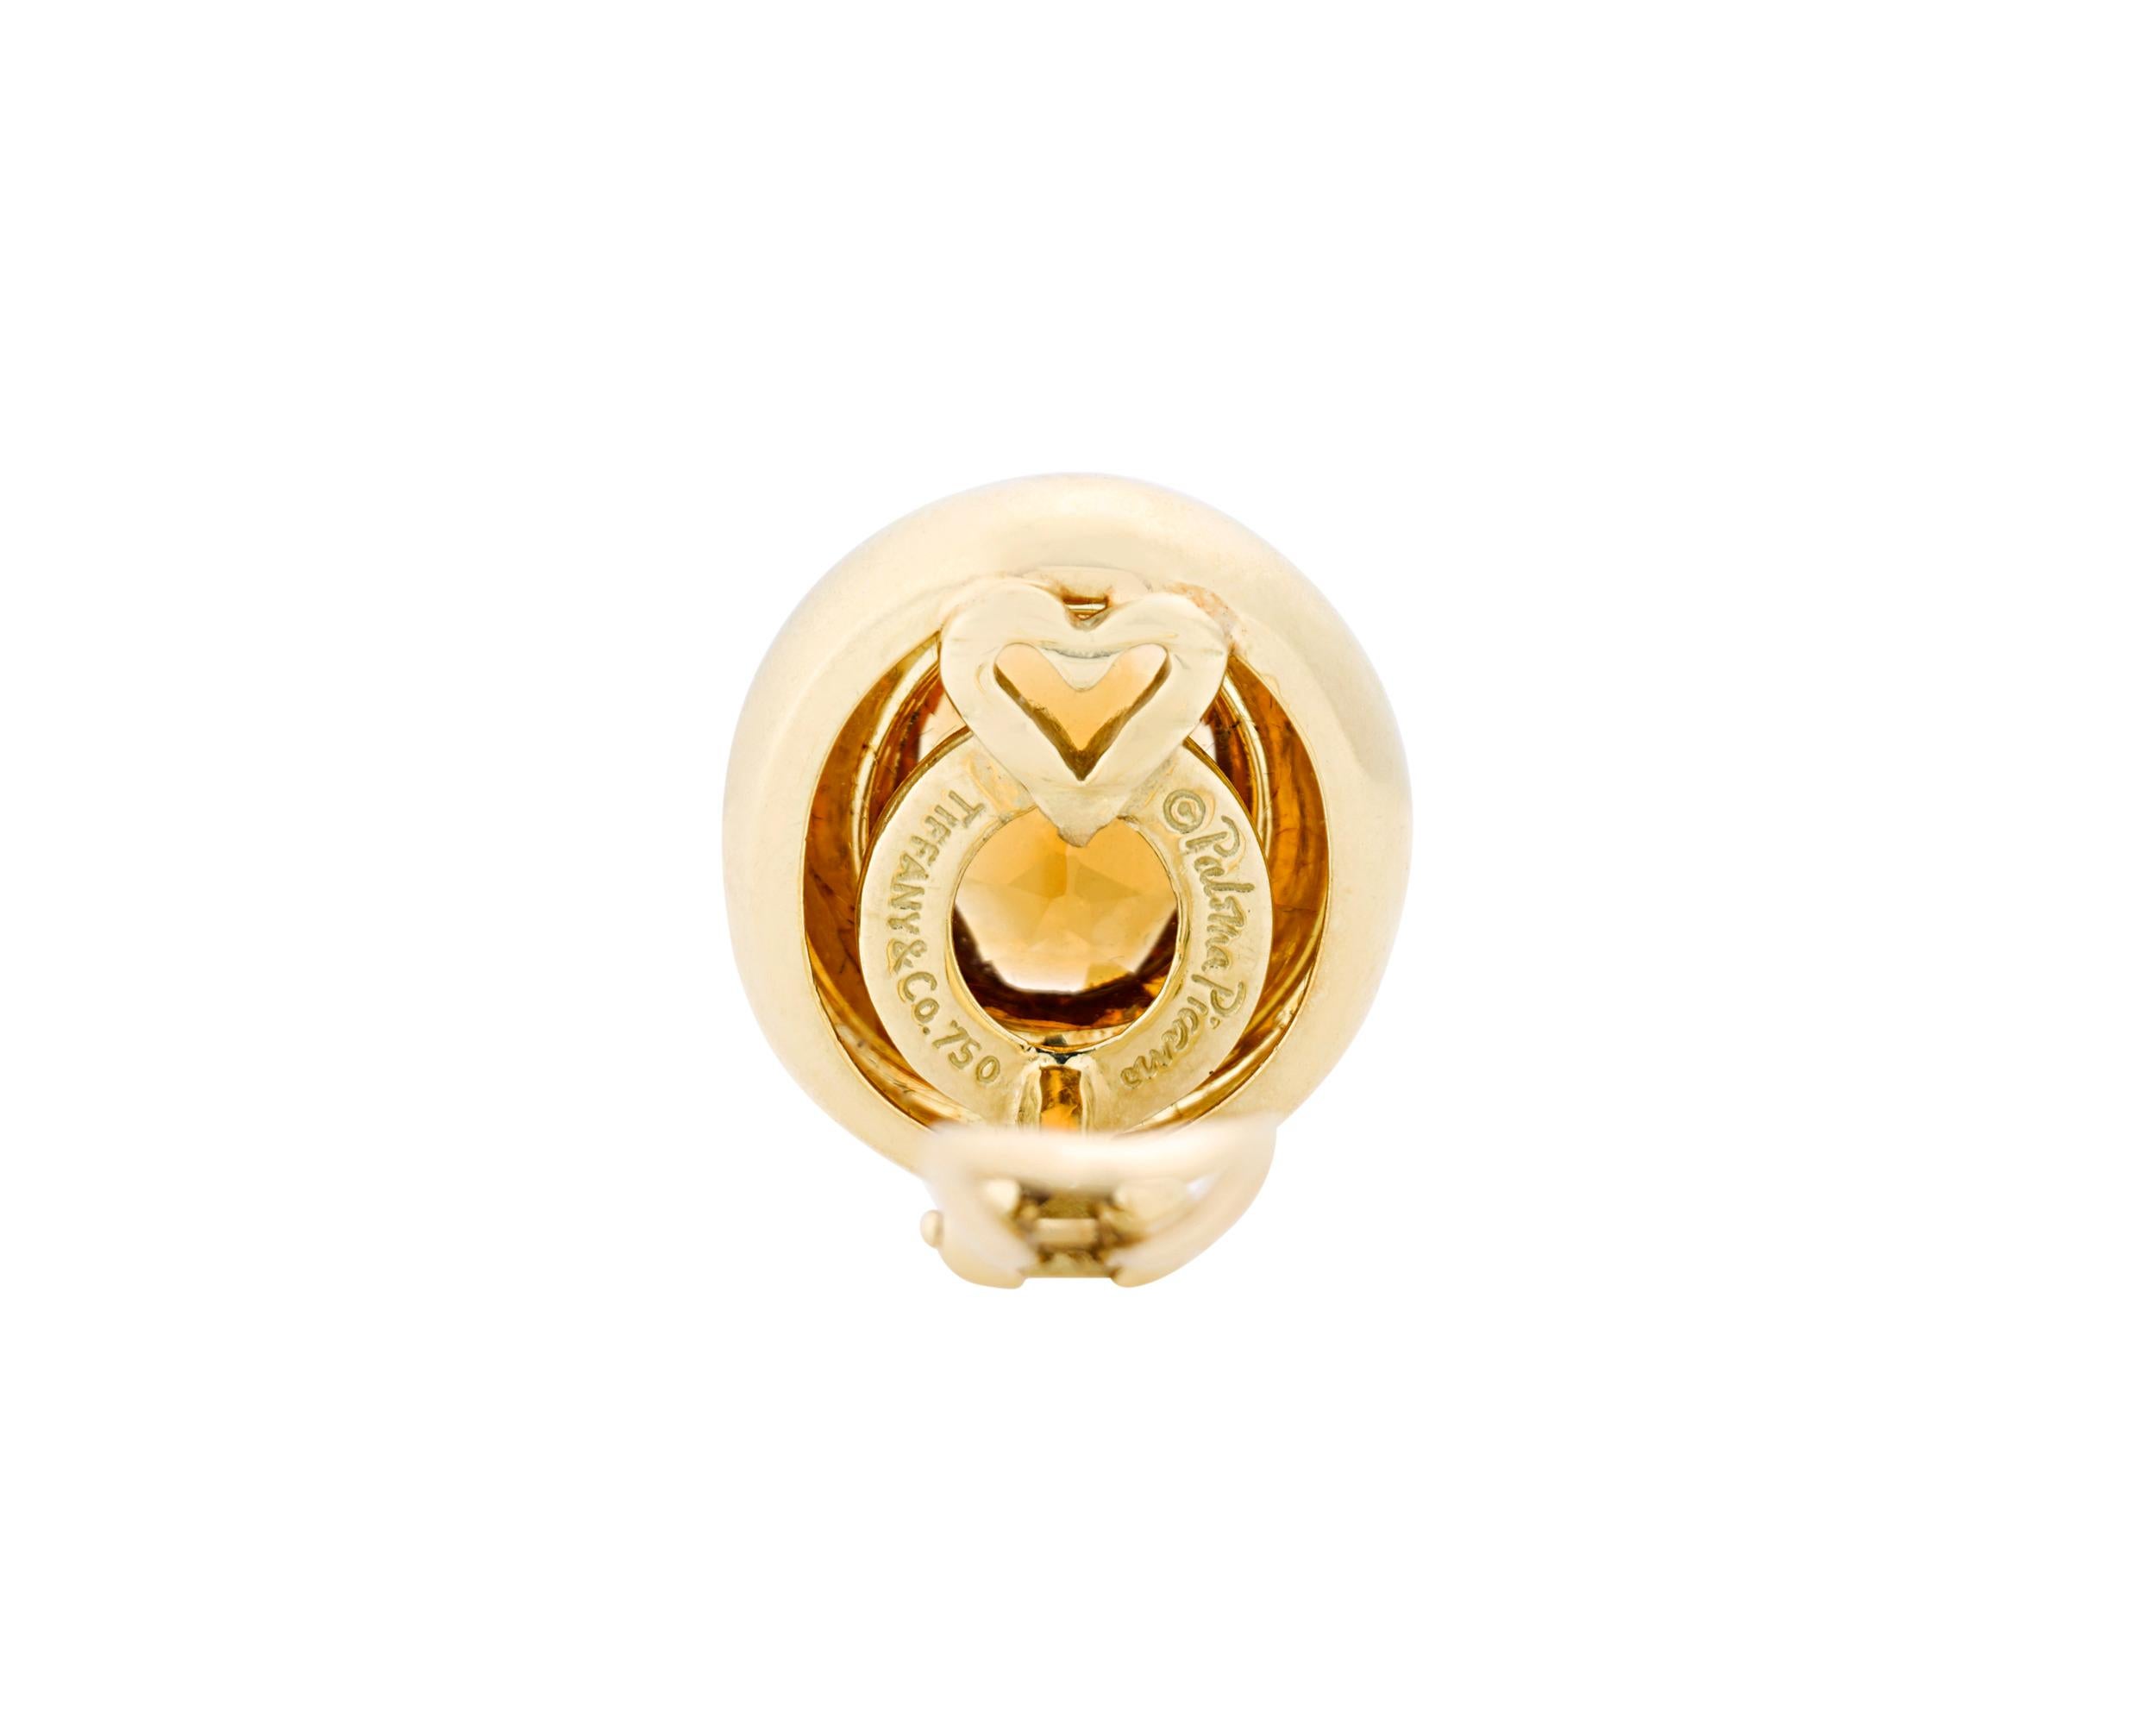 This stylish pair of citrine and 18K yellow gold stud earrings by Tiffany & Co. designer Paloma Picasso exhibits the firm's timeless artistry. The citrines, totaling approximately 6.50 carats, exhibit a vibrant shade of orange, lending these